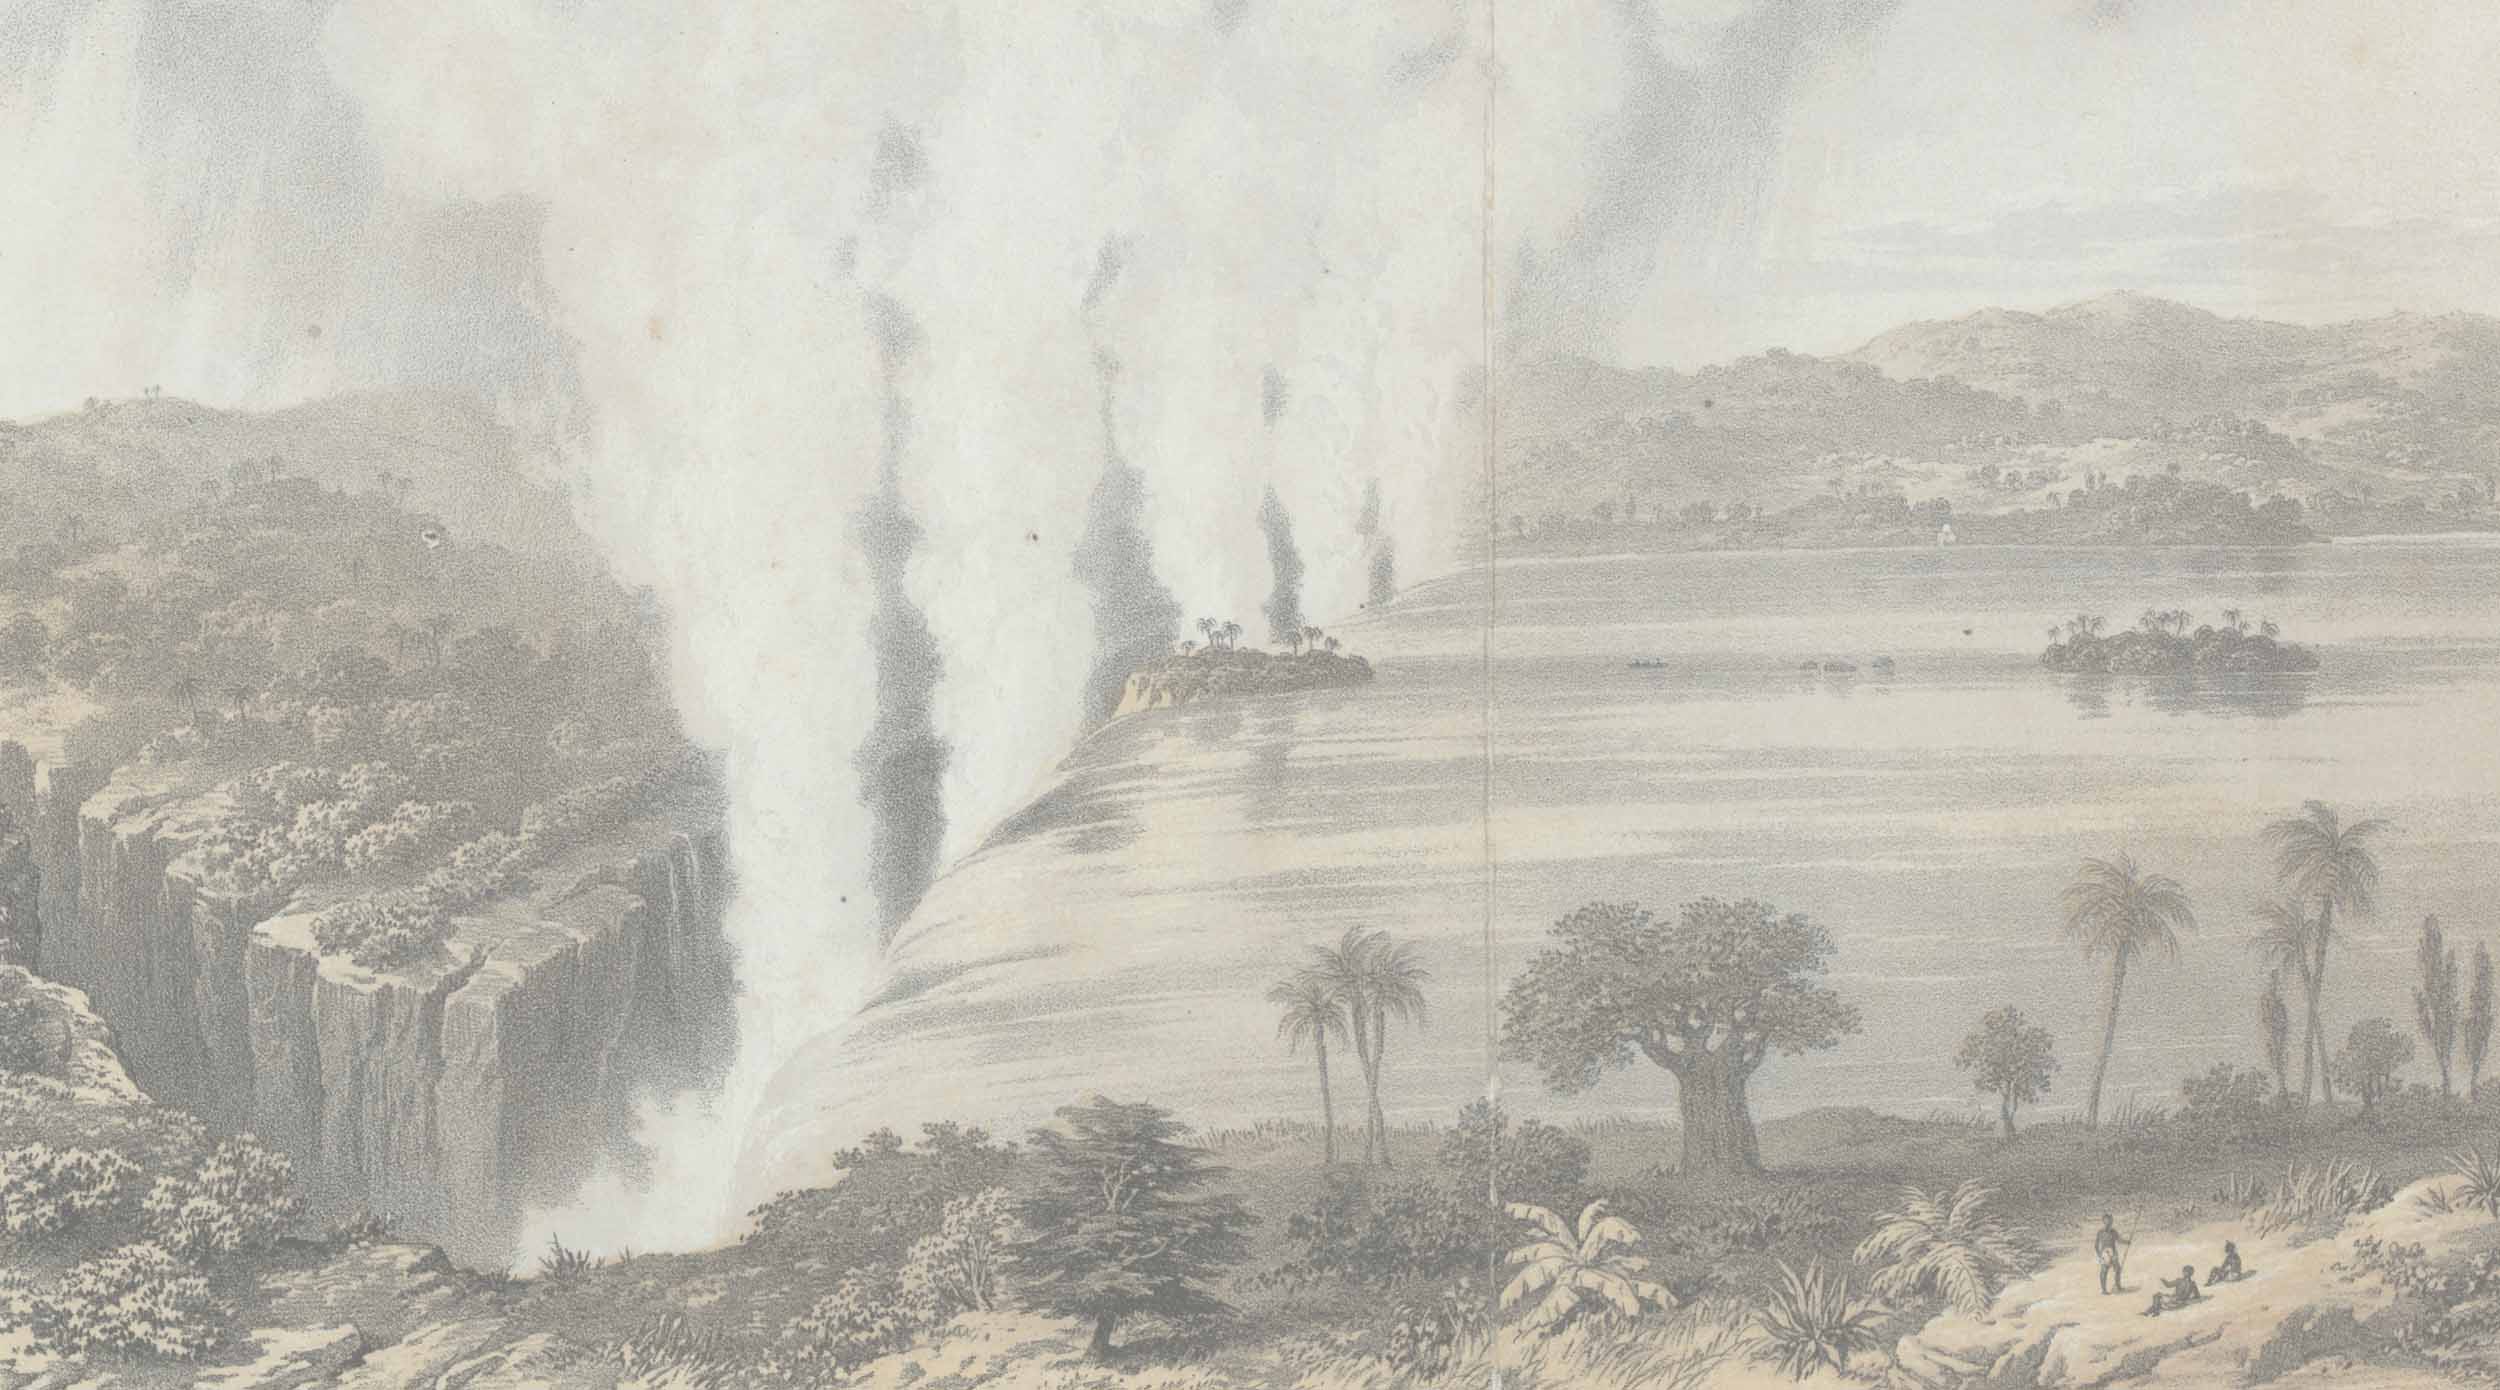 'The Victoria Falls, of the Leeambye or Zambesi River Called by the Natives Mosioatunya (Smoke Sounding),' Missionary Travels, 1857. Copyright National Library of Scotland. Creative Commons Share-alike 2.5 UK: Scotland (https://creativecommons.org/licenses)